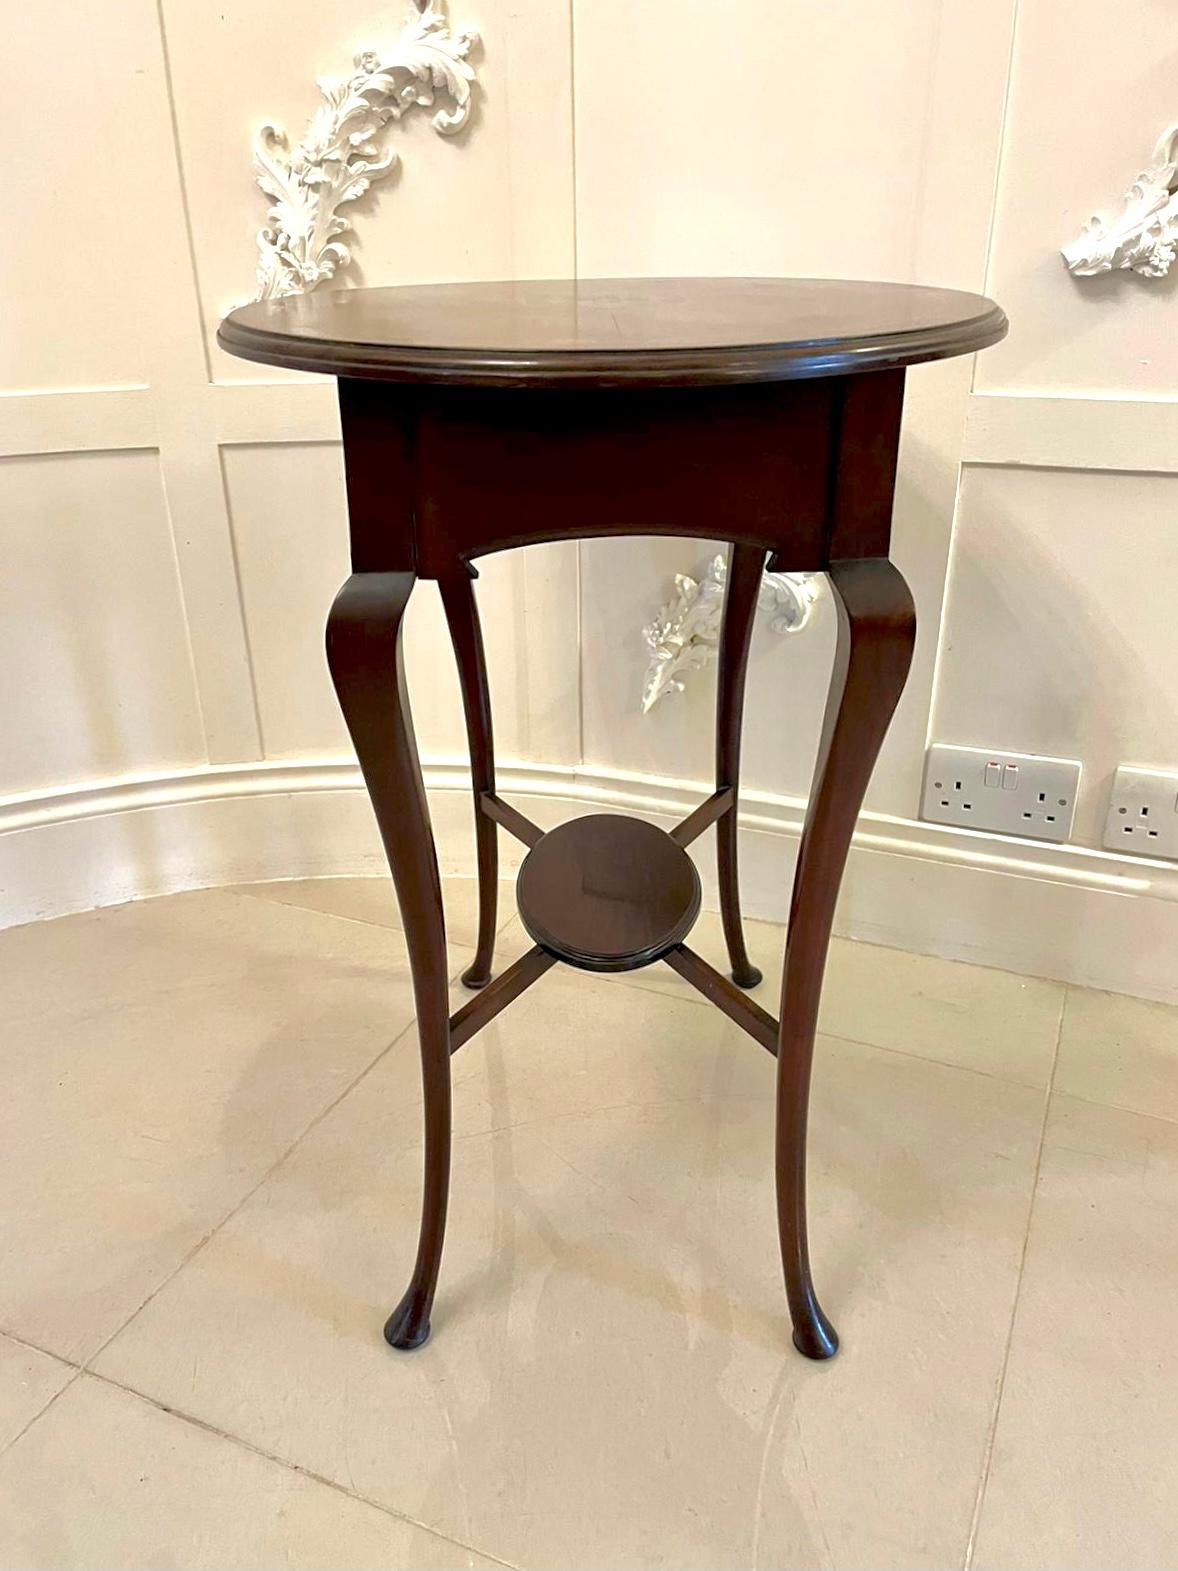 Quality Antique Art Nouveau Inlaid Mahogany Oval Lamp Table In Good Condition For Sale In Suffolk, GB